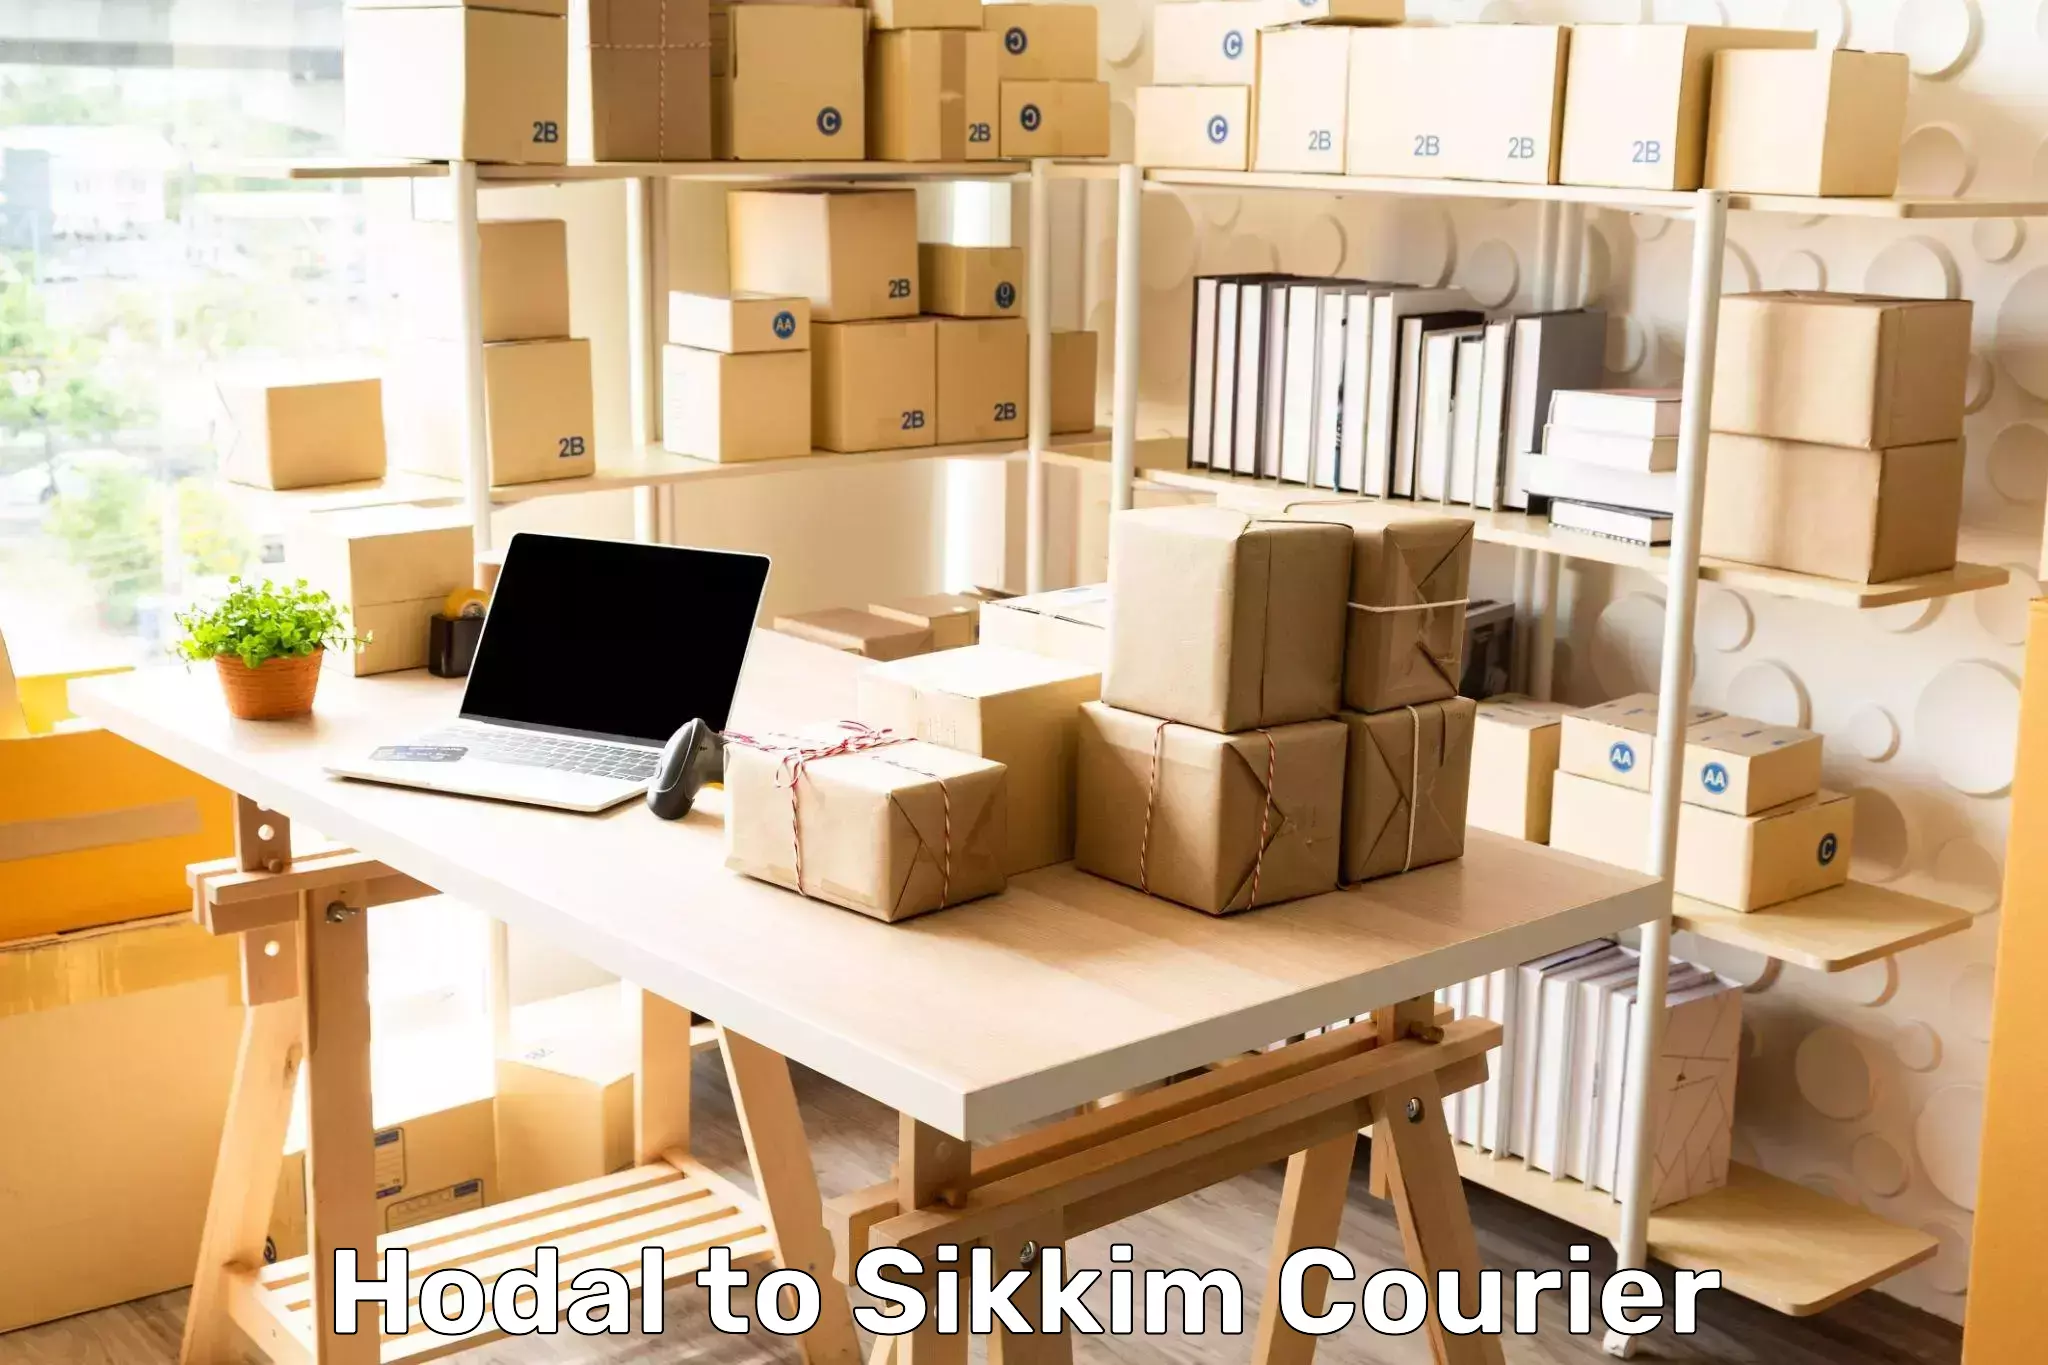 State-of-the-art courier technology Hodal to Sikkim